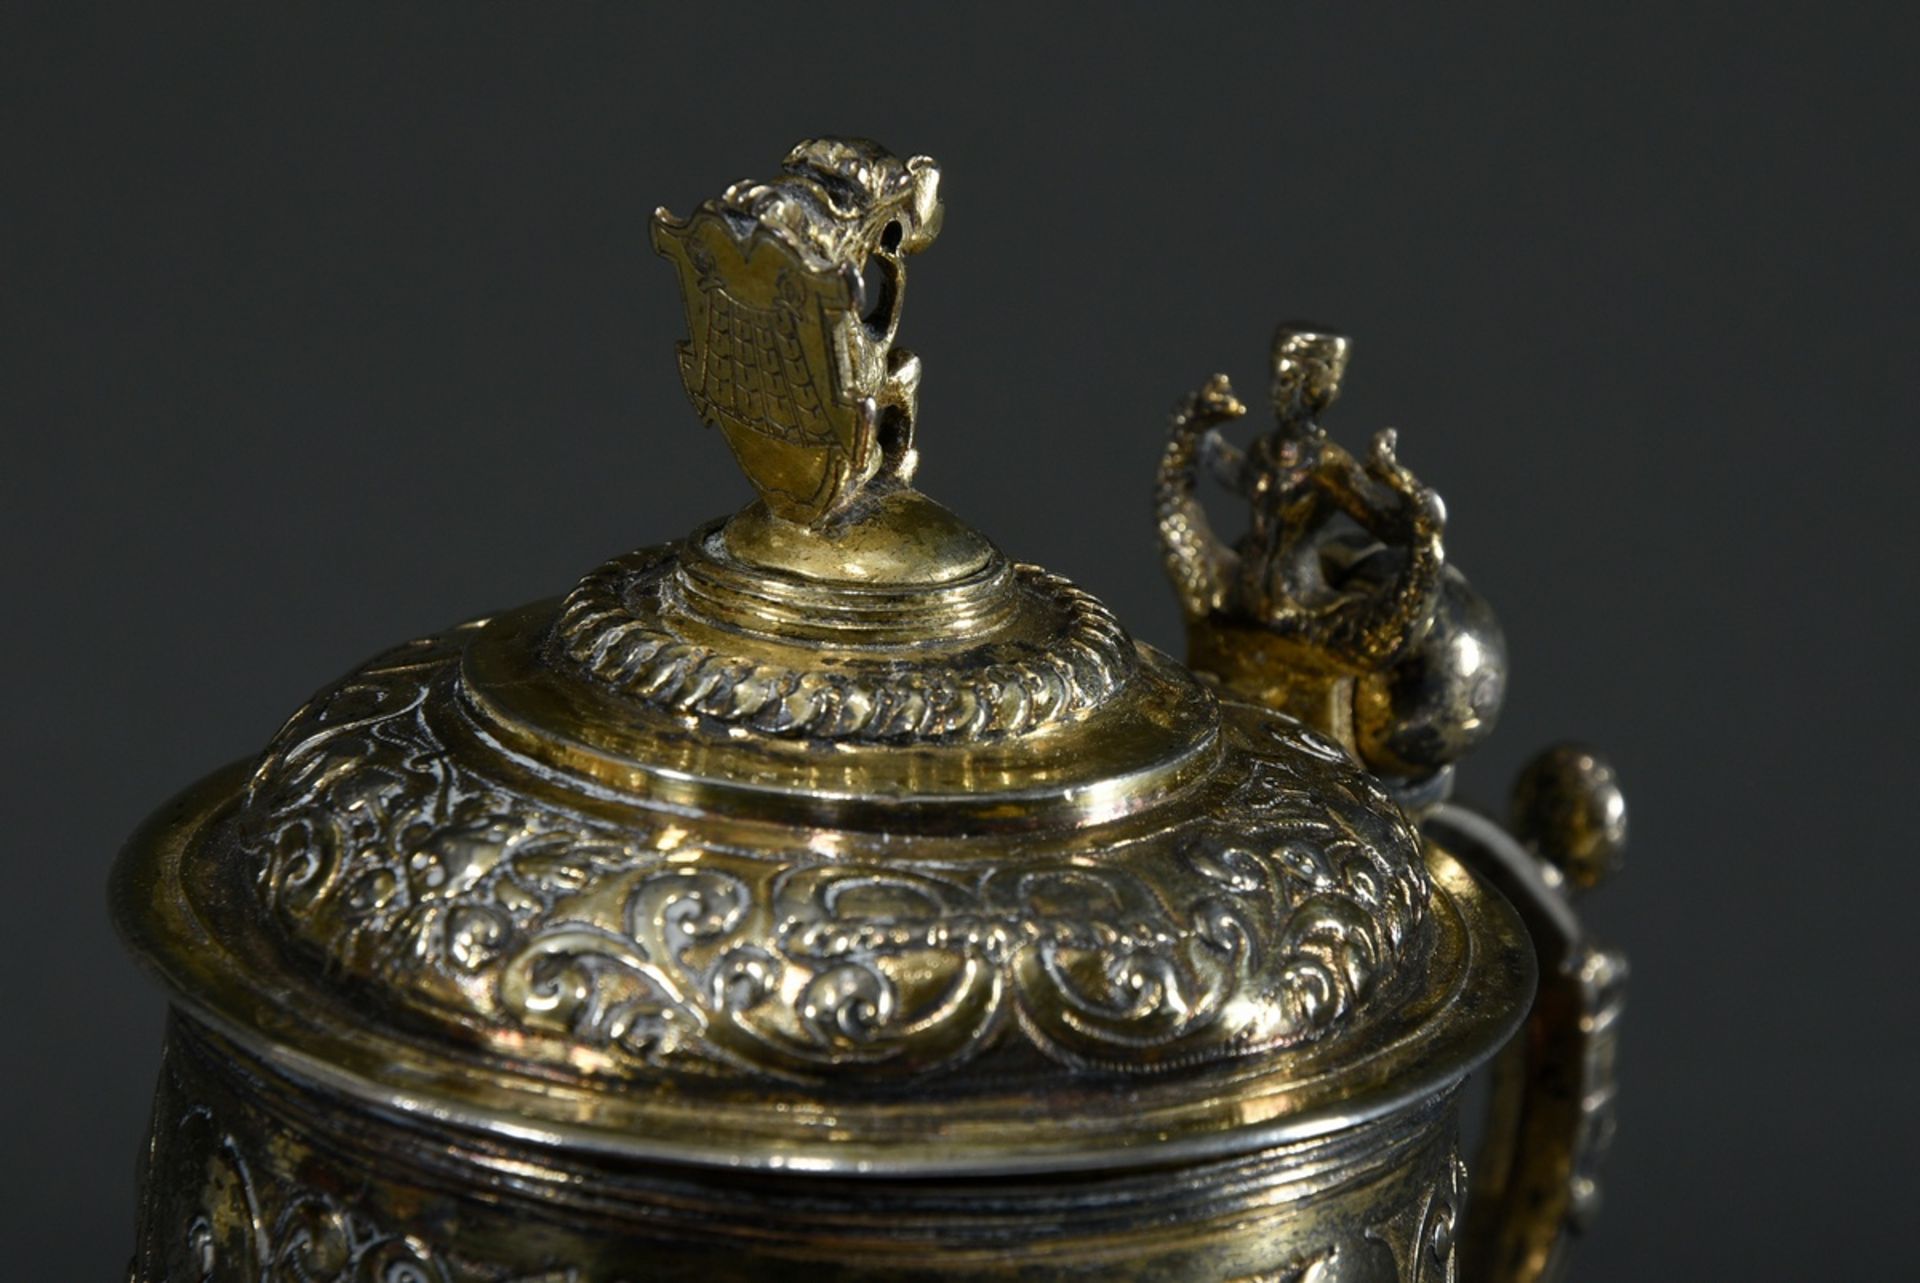 Small Mannerist lidded tankard with "fruit hangings and winged angels' heads" between scrollwork ov - Image 5 of 11